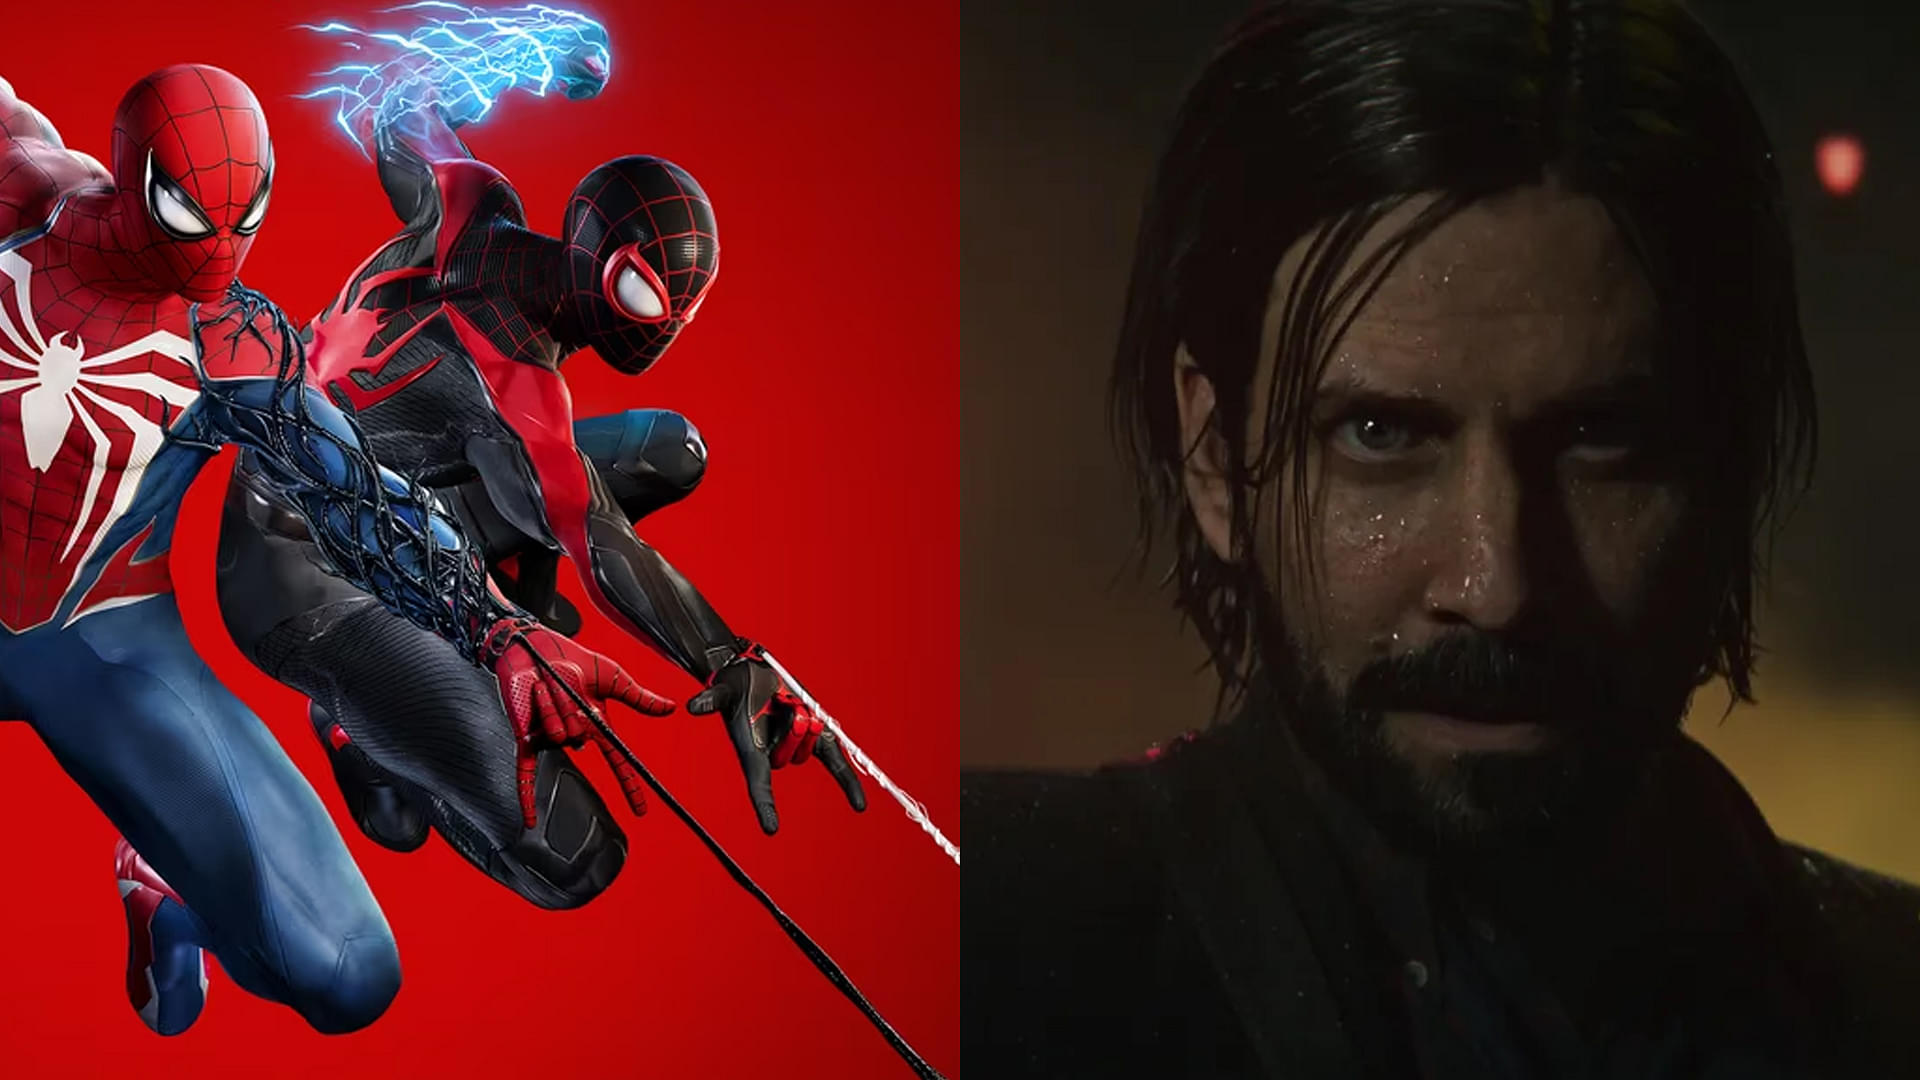 An image showing Alan Wake and two Spider-Mans in one collage